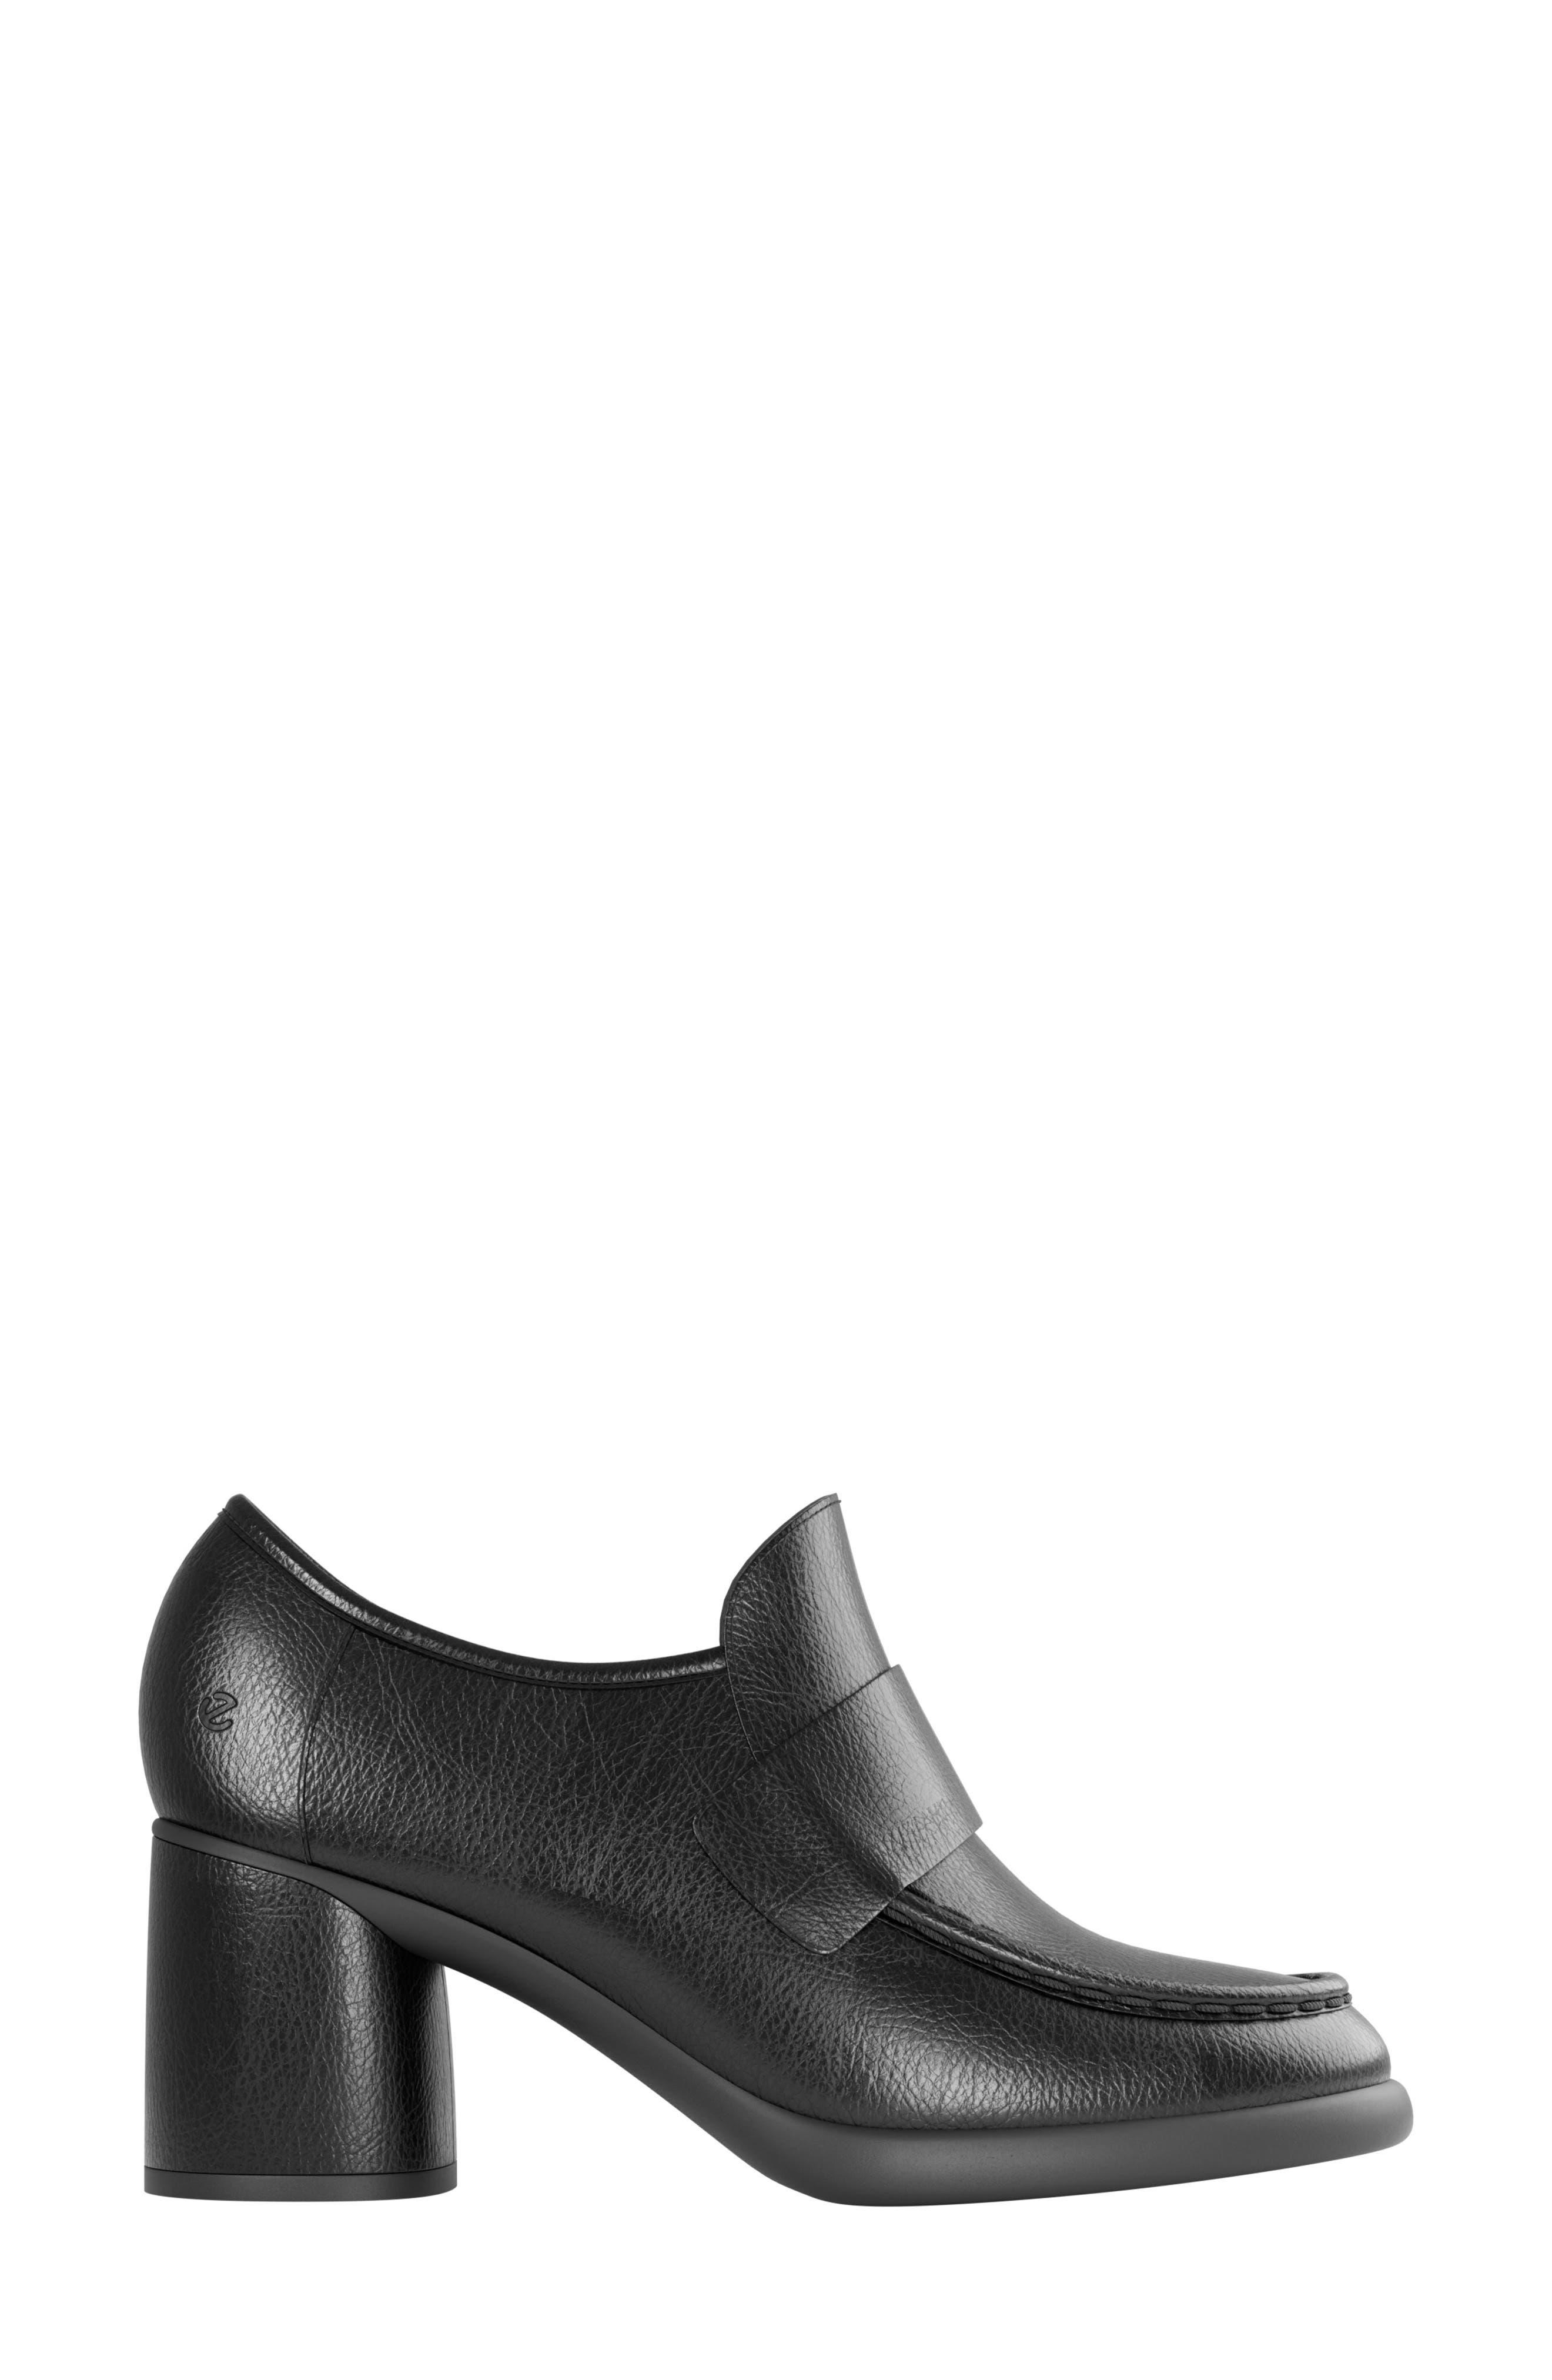 Ecco Lx 55 Loafer Pump in Black | Lyst